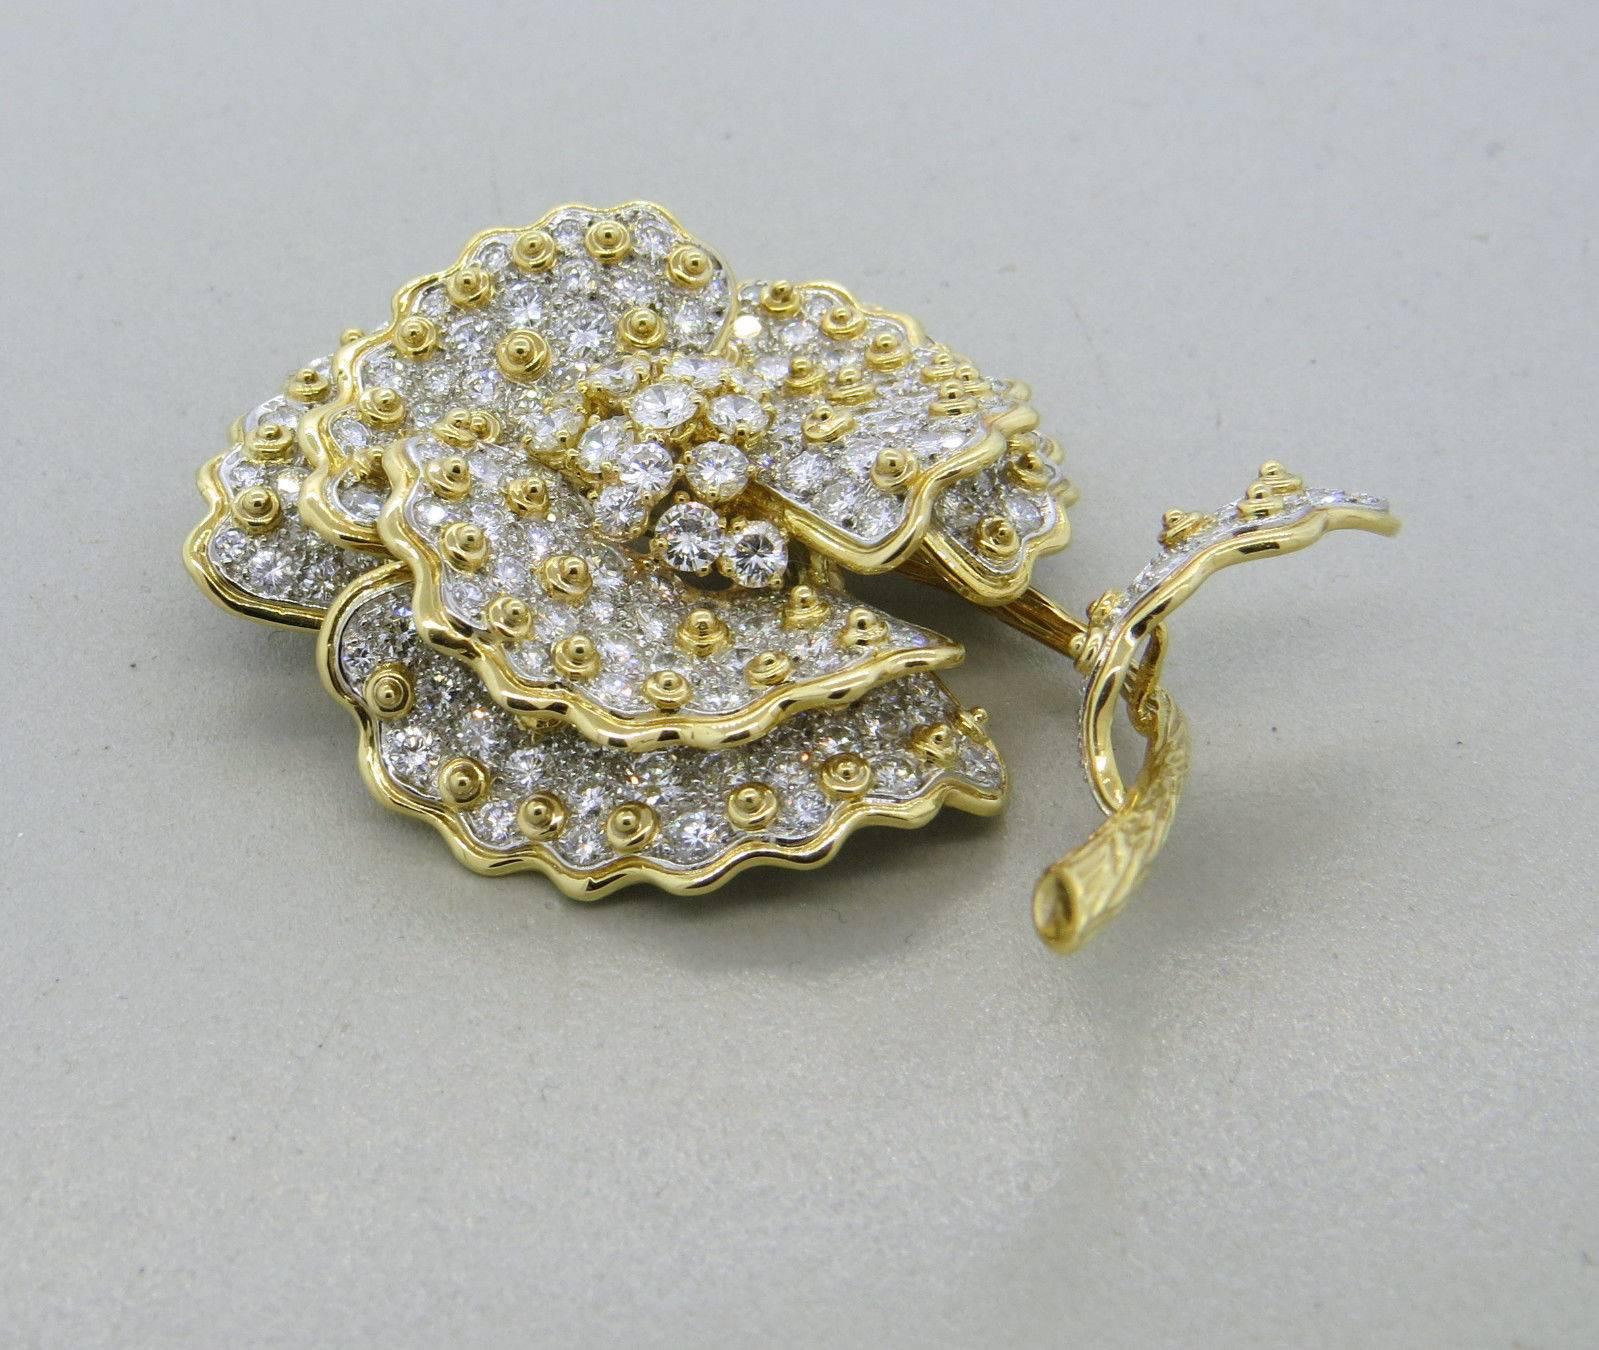 An 18k yellow gold brooch set with 15.25ctw of FG/VS diamonds.  The brooch measures 65mm x 49mm, stem can be removed - see photos.  The weight of the piece is 50.3 grams.